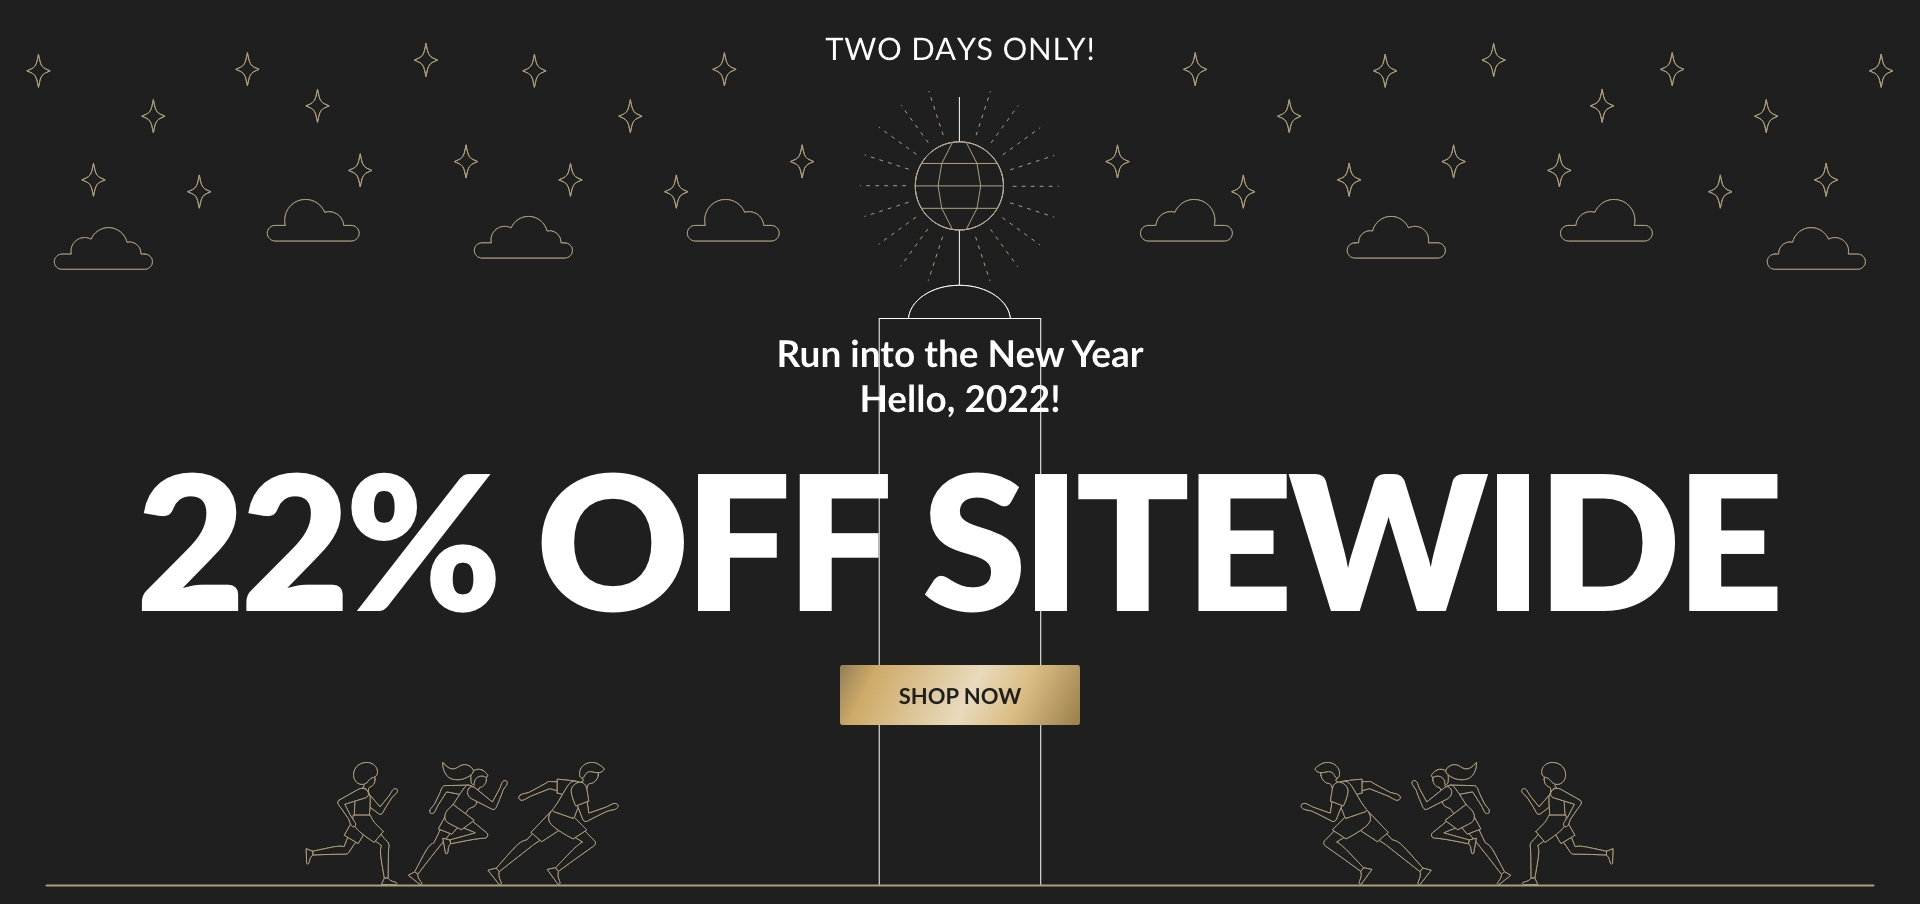 Two Days Only. Run into the New Year. Hell0, 2022! 22% Off Sitewide. Shop Now